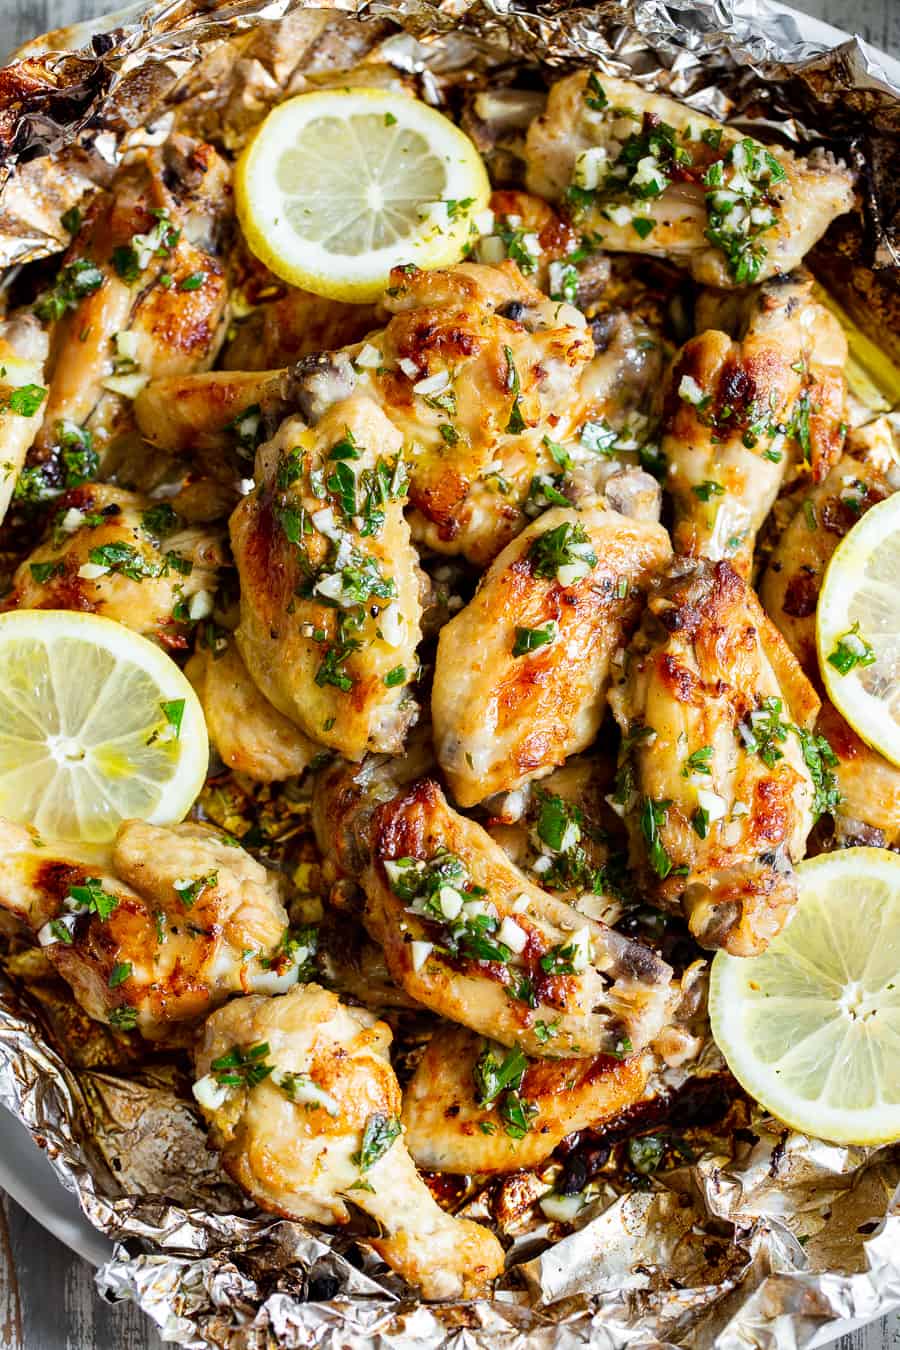 These delicious, grilled chicken wings have an easy sauce with lots of bright lemon, savory garlic, and fresh herbs and go perfectly with all your favorite potato salads and summer sides!  These flavor-packed wings are Whole30 compliant, paleo, keto, and dairy-free.  